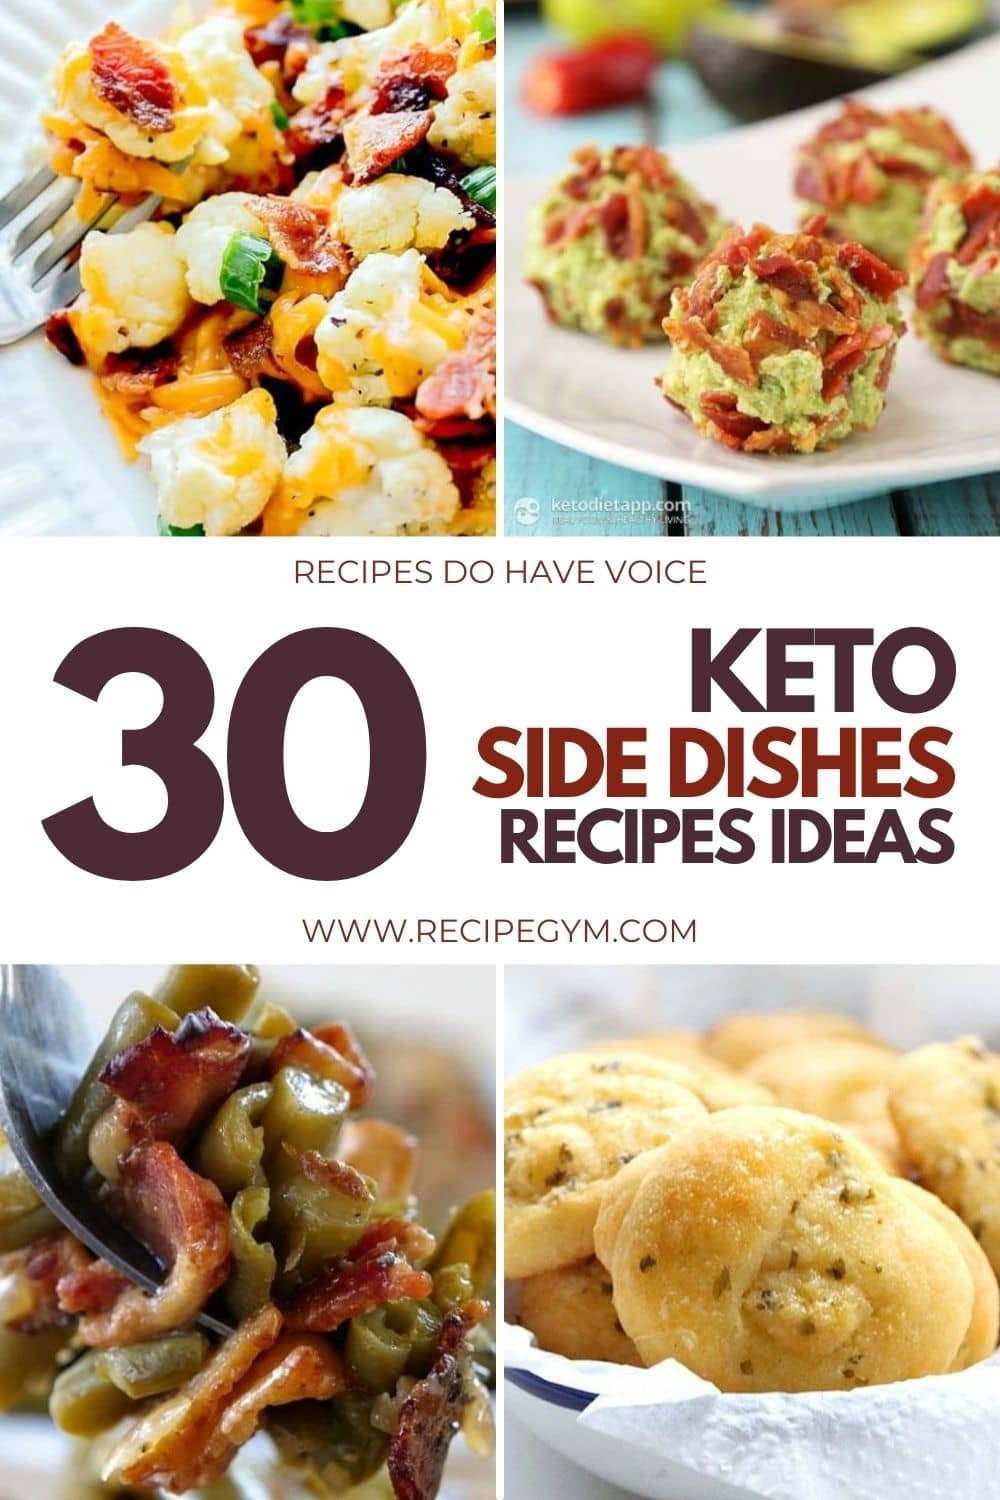 30 keto side dishes recipes